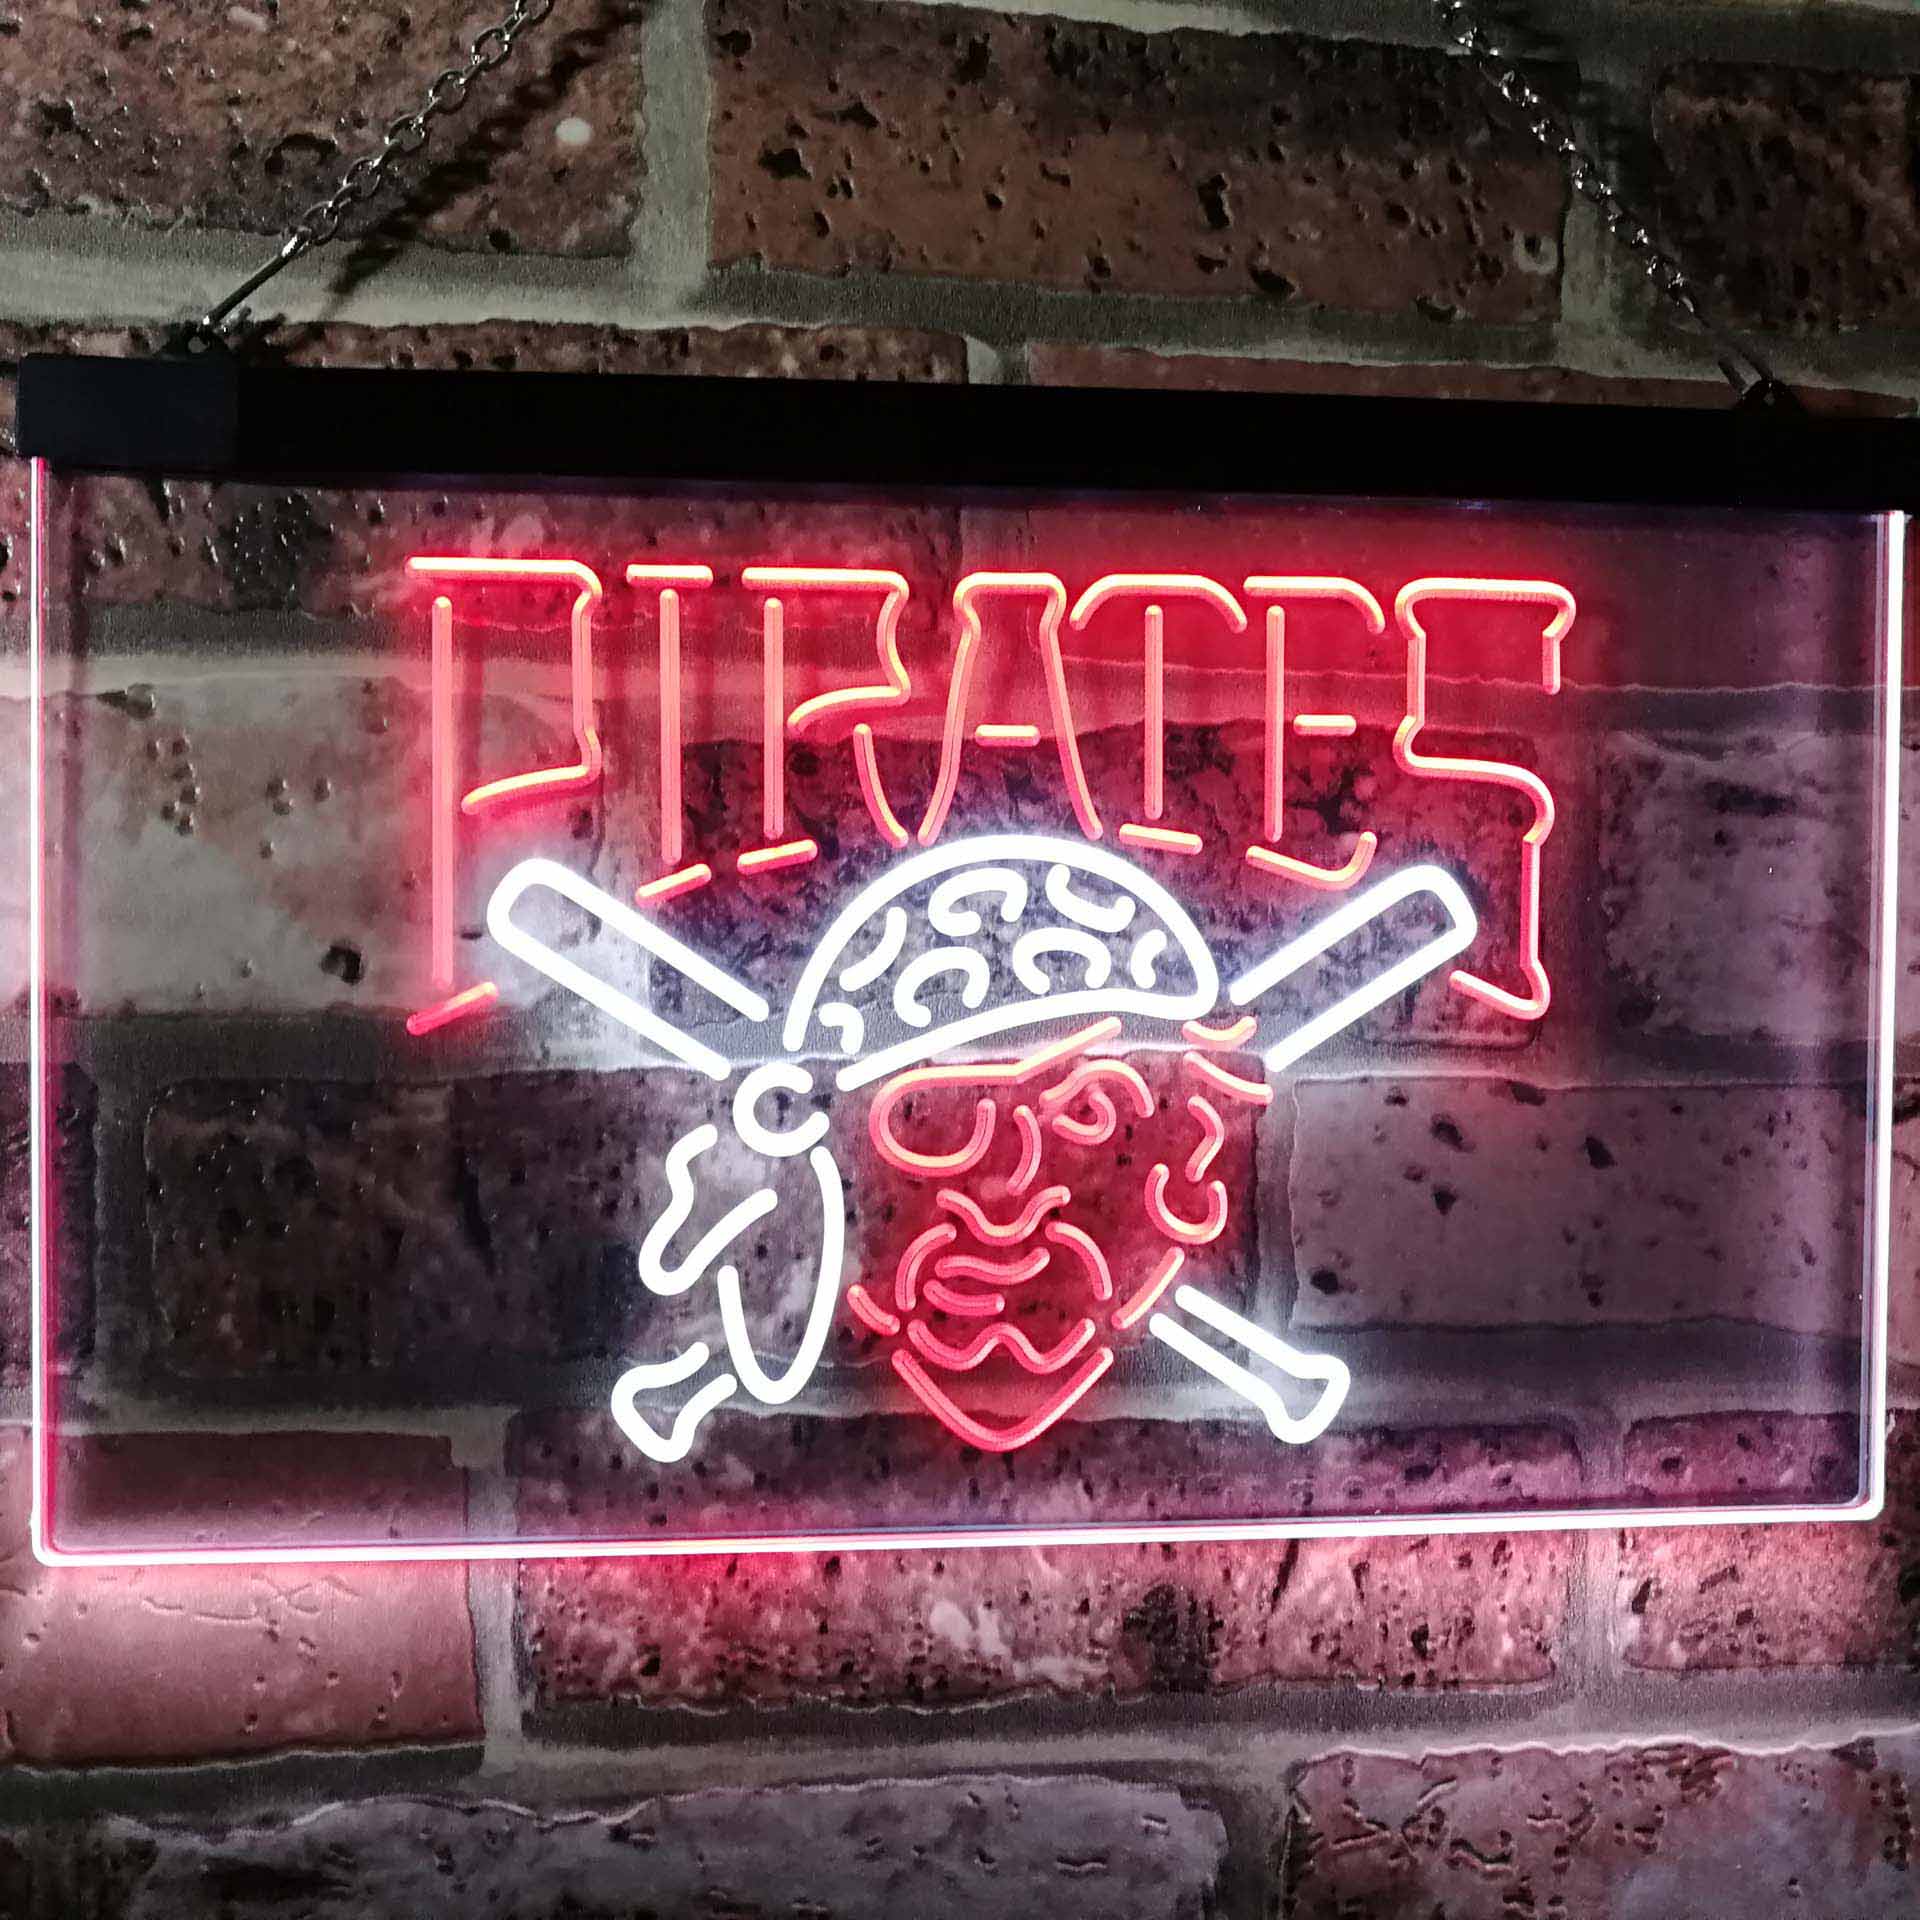 Pittsburgh Pirates Neon LED Sign